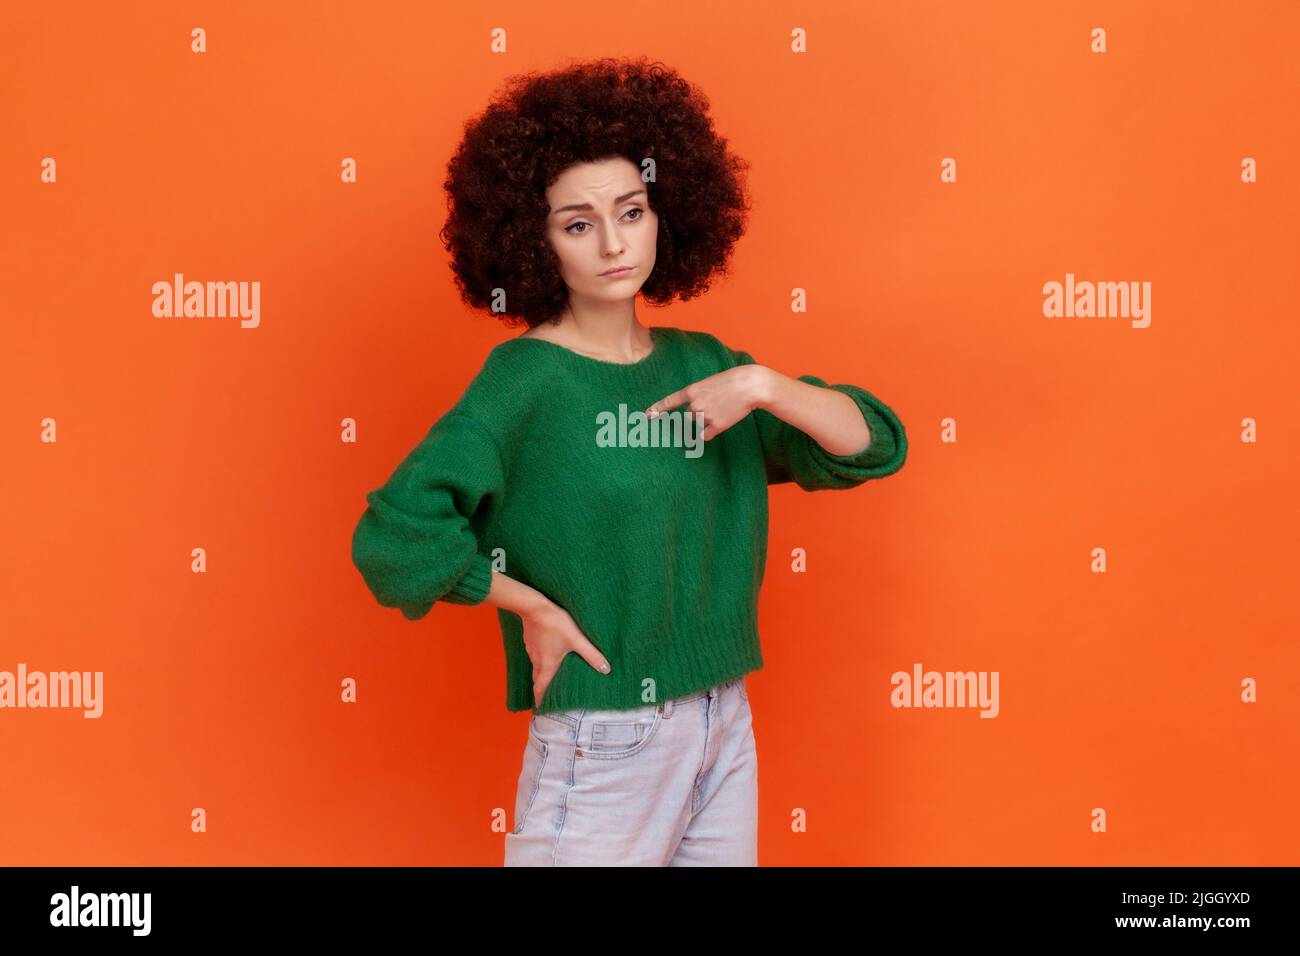 Portrait of selfish woman with Afro hairstyle wearing green casual style sweater pointing at herself with finger, having proud expression. Indoor studio shot isolated on orange background. Stock Photo